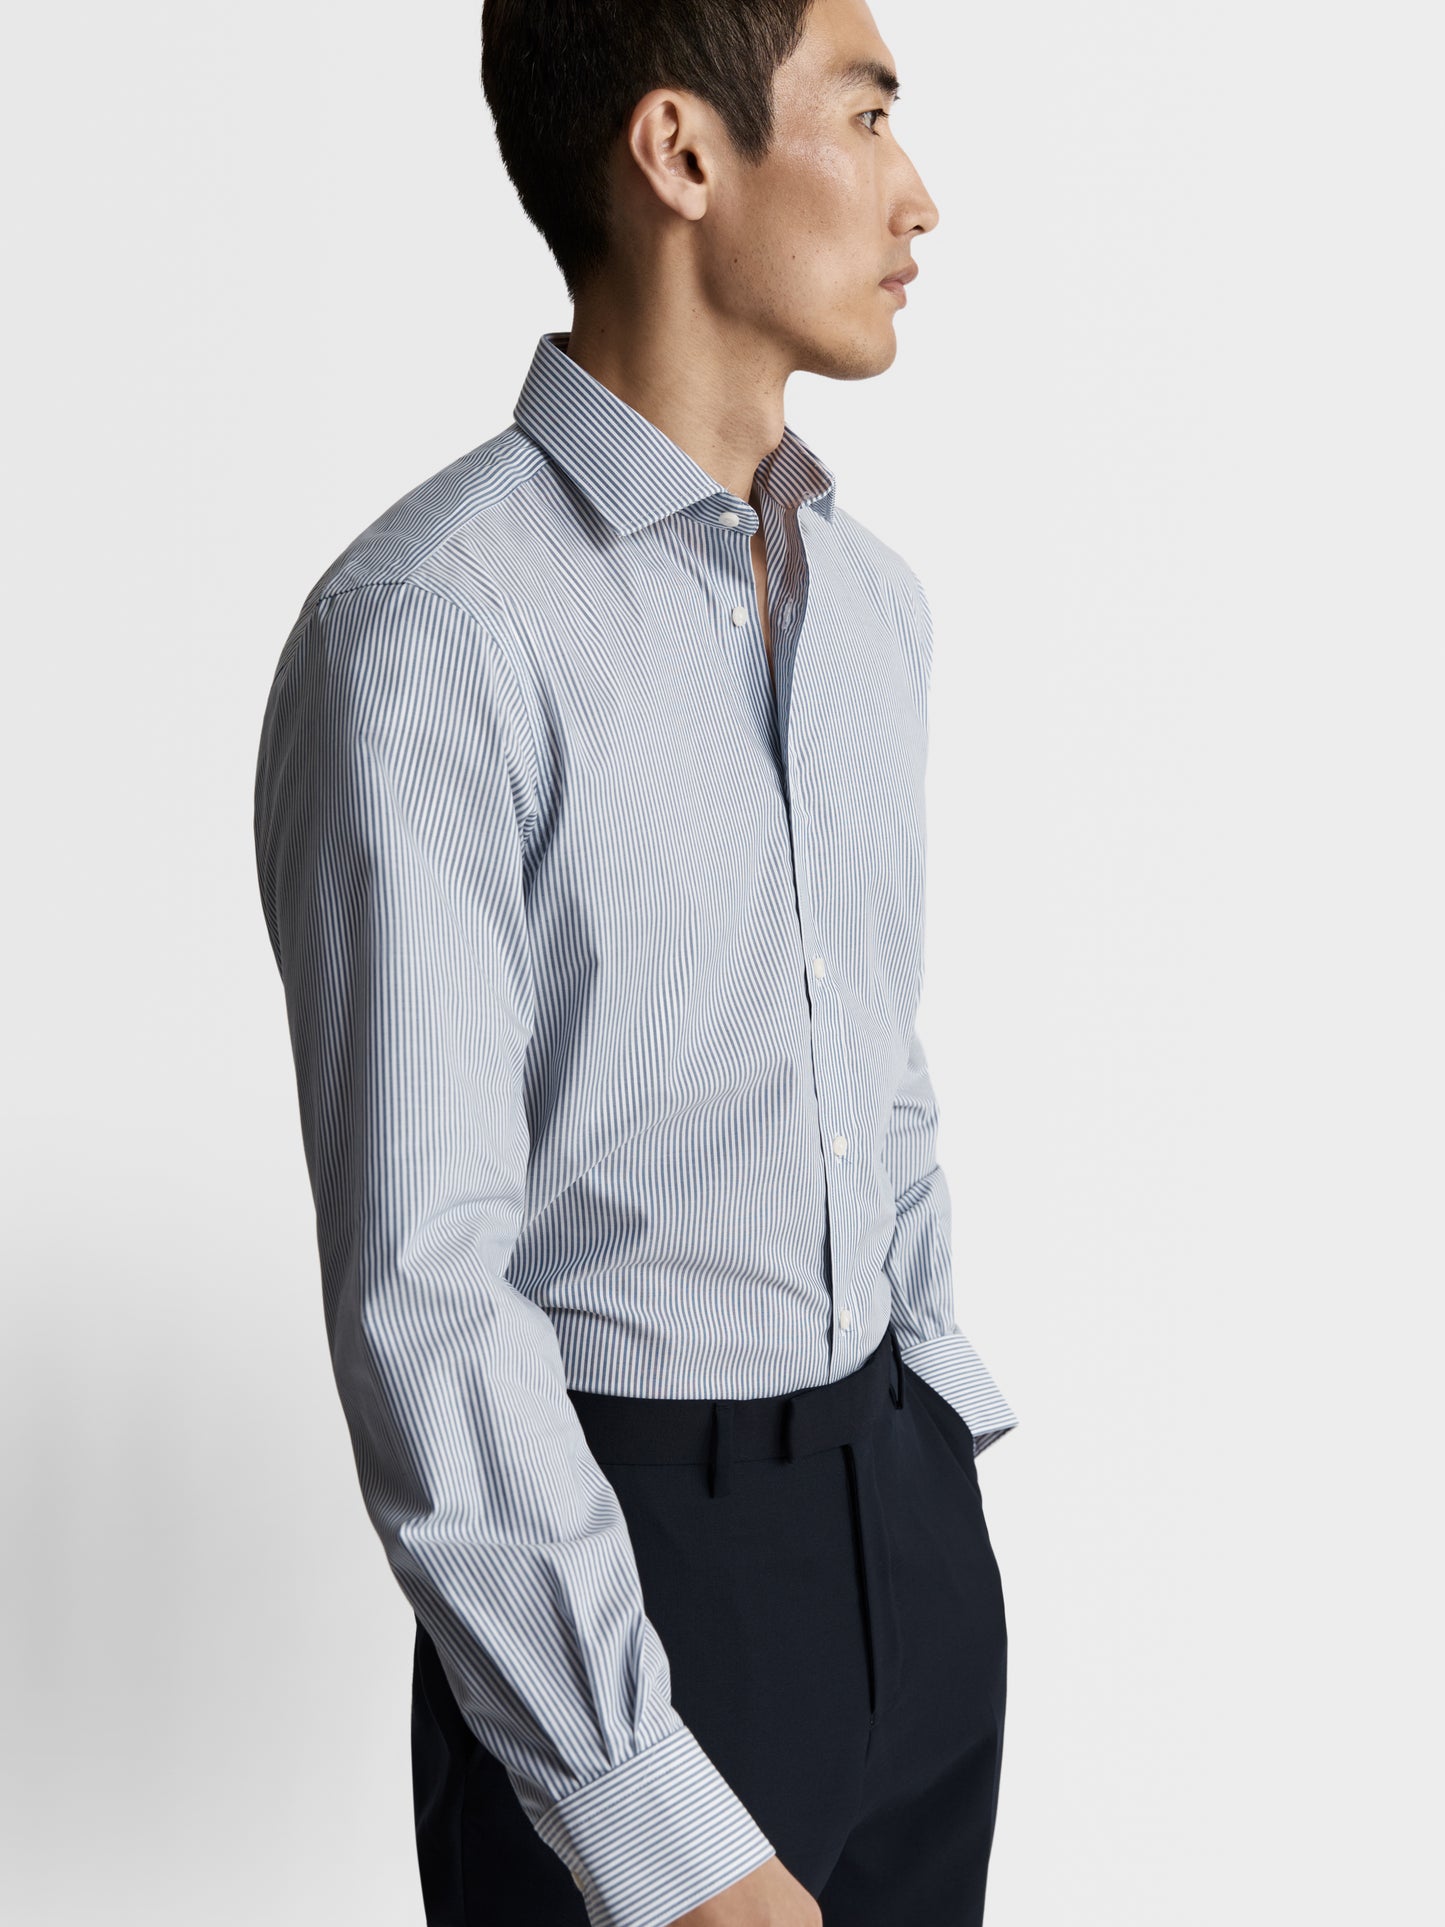 Image 1 of Max Performance Navy Blue Bengal Stripe Plain Weave Fitted Single Cuff Classic Collar Shirt